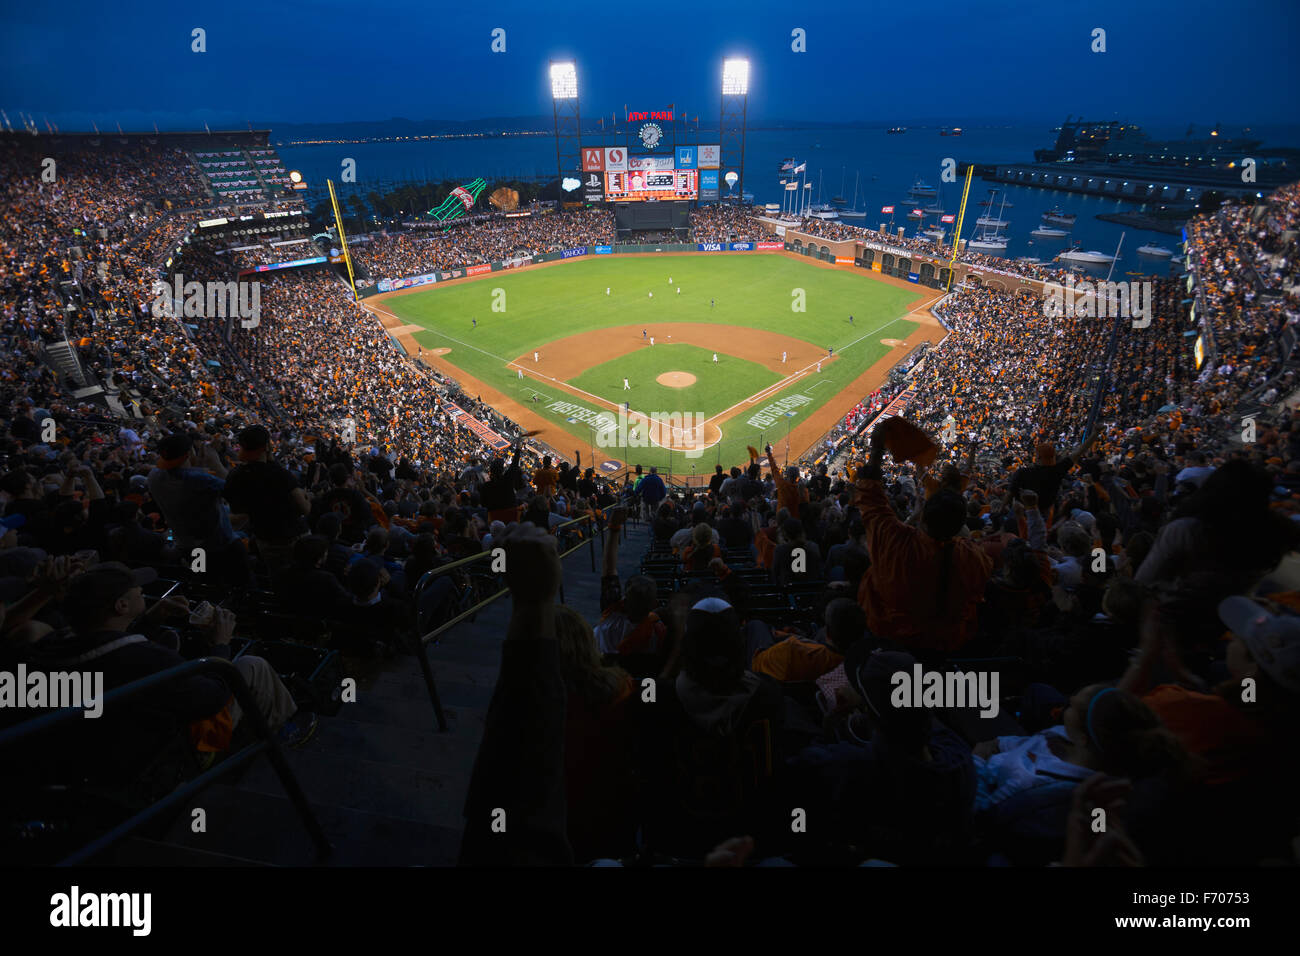 San Francisco, California, USA, October 16, 2014, AT&T Park, baseball stadium, SF Giants versus St. Louis Cardinals, National League Championship Series (NLCS), crowd watches game elevated view Stock Photo